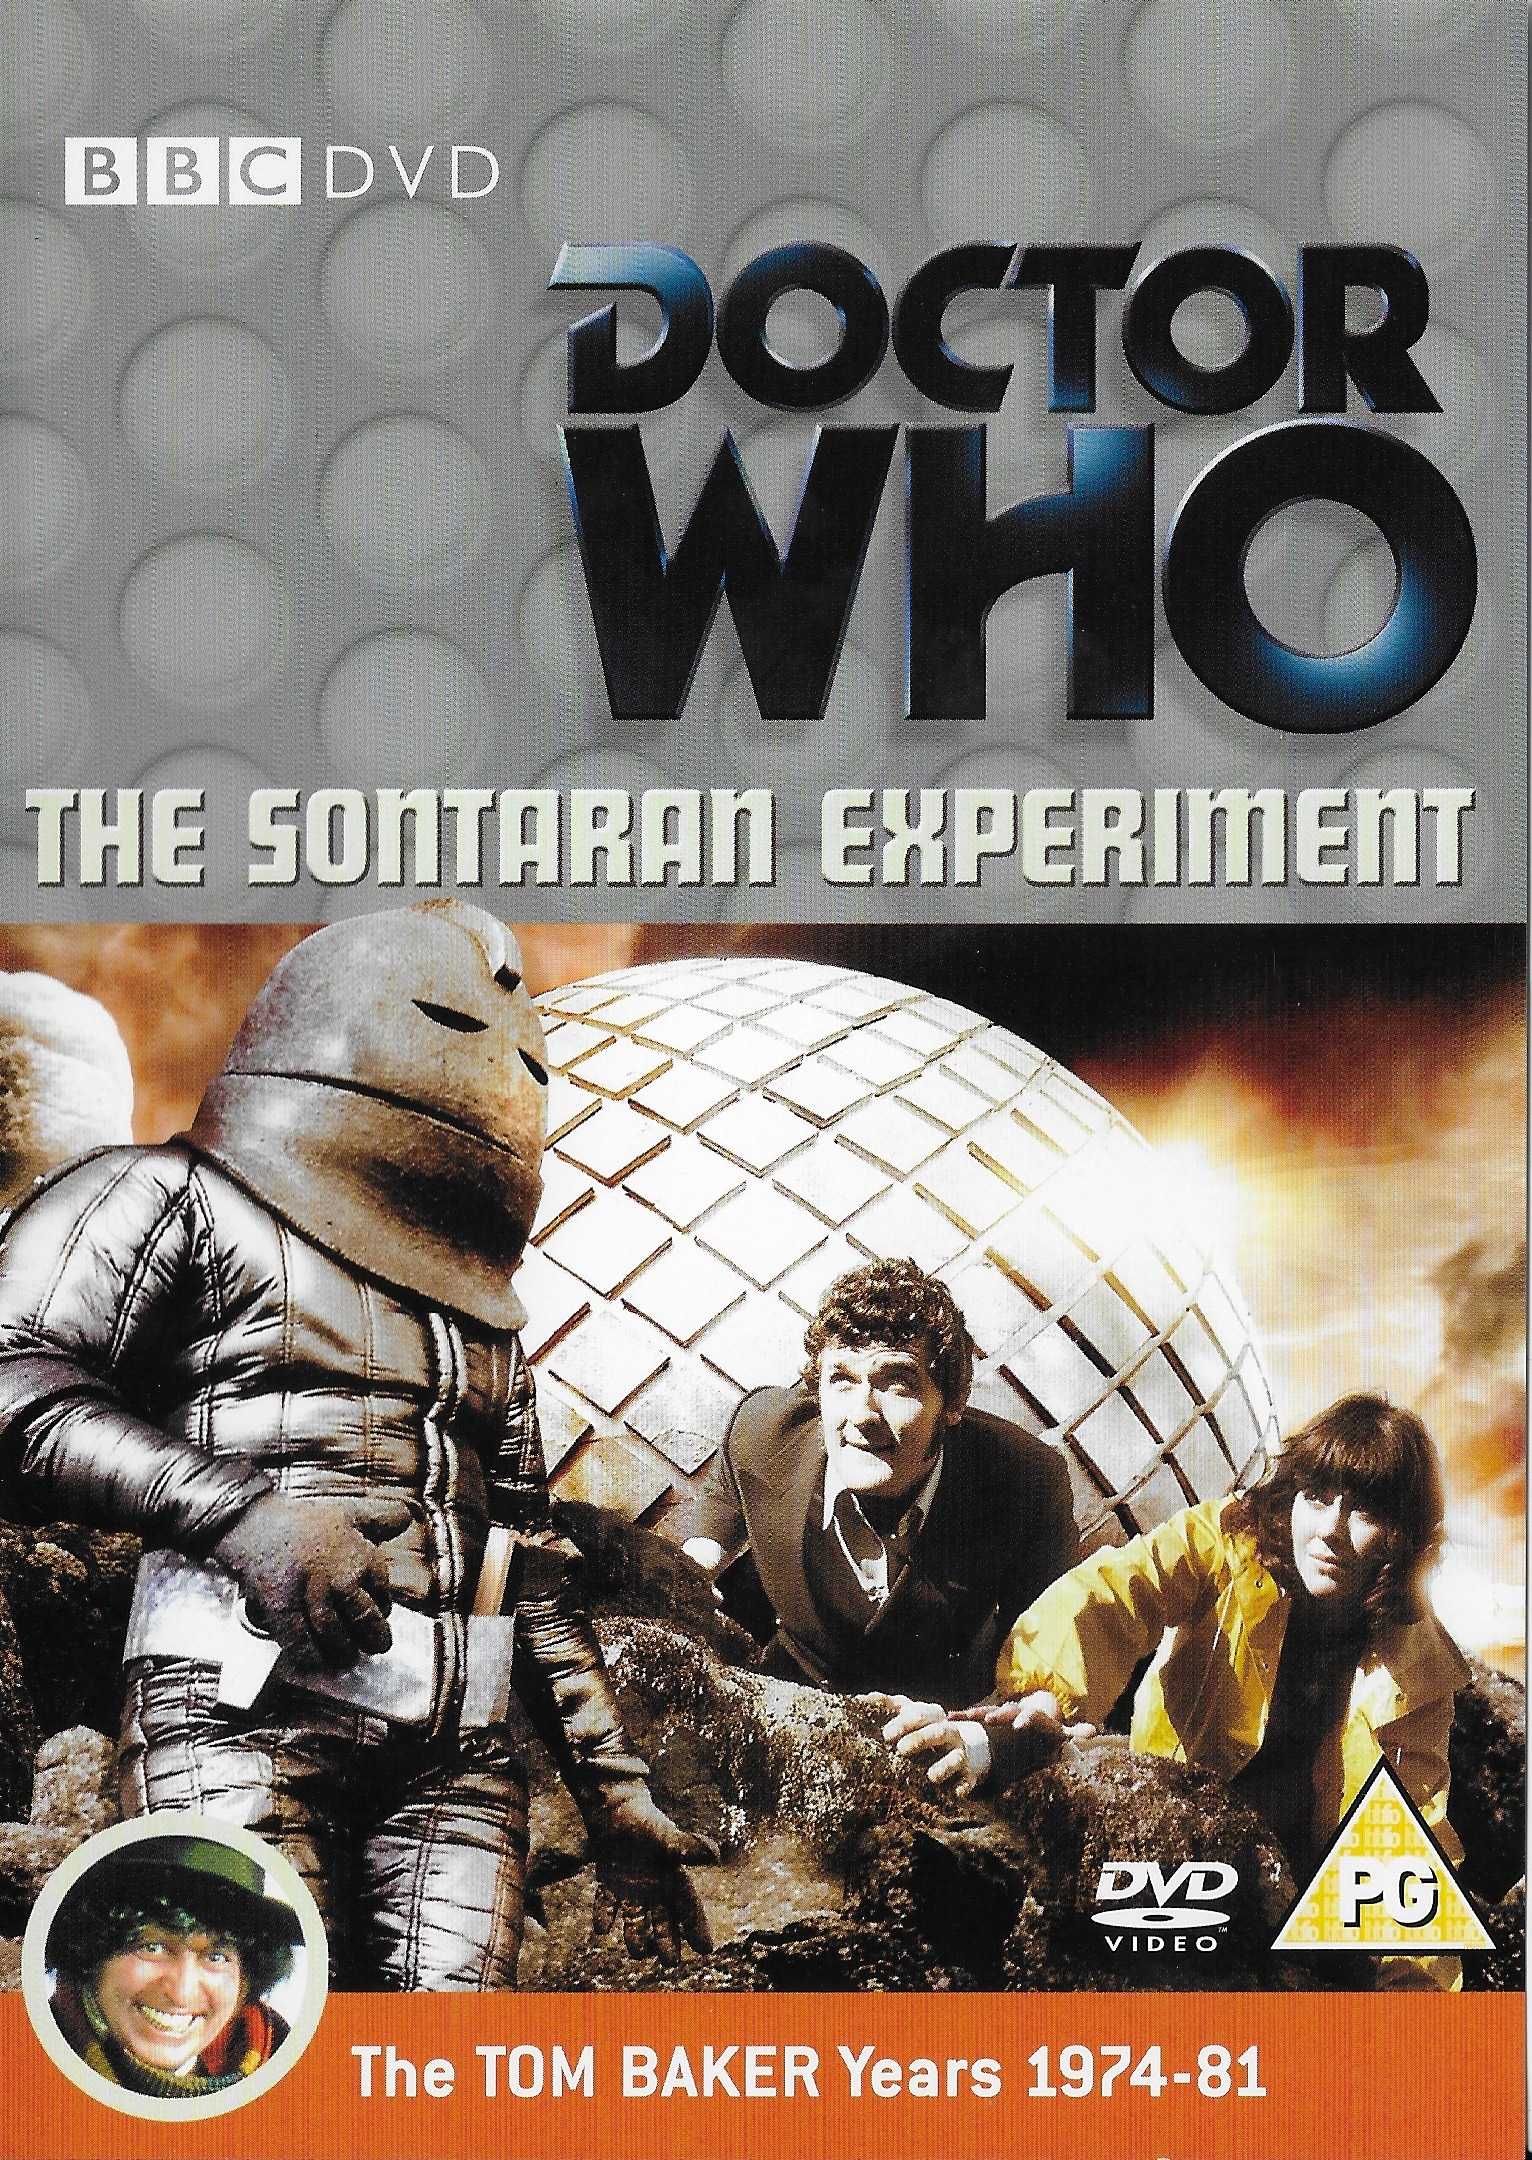 Picture of BBCDVD 1811 Doctor Who - The Sontaran experiment by artist Bob Baker / Dave Martin from the BBC dvds - Records and Tapes library